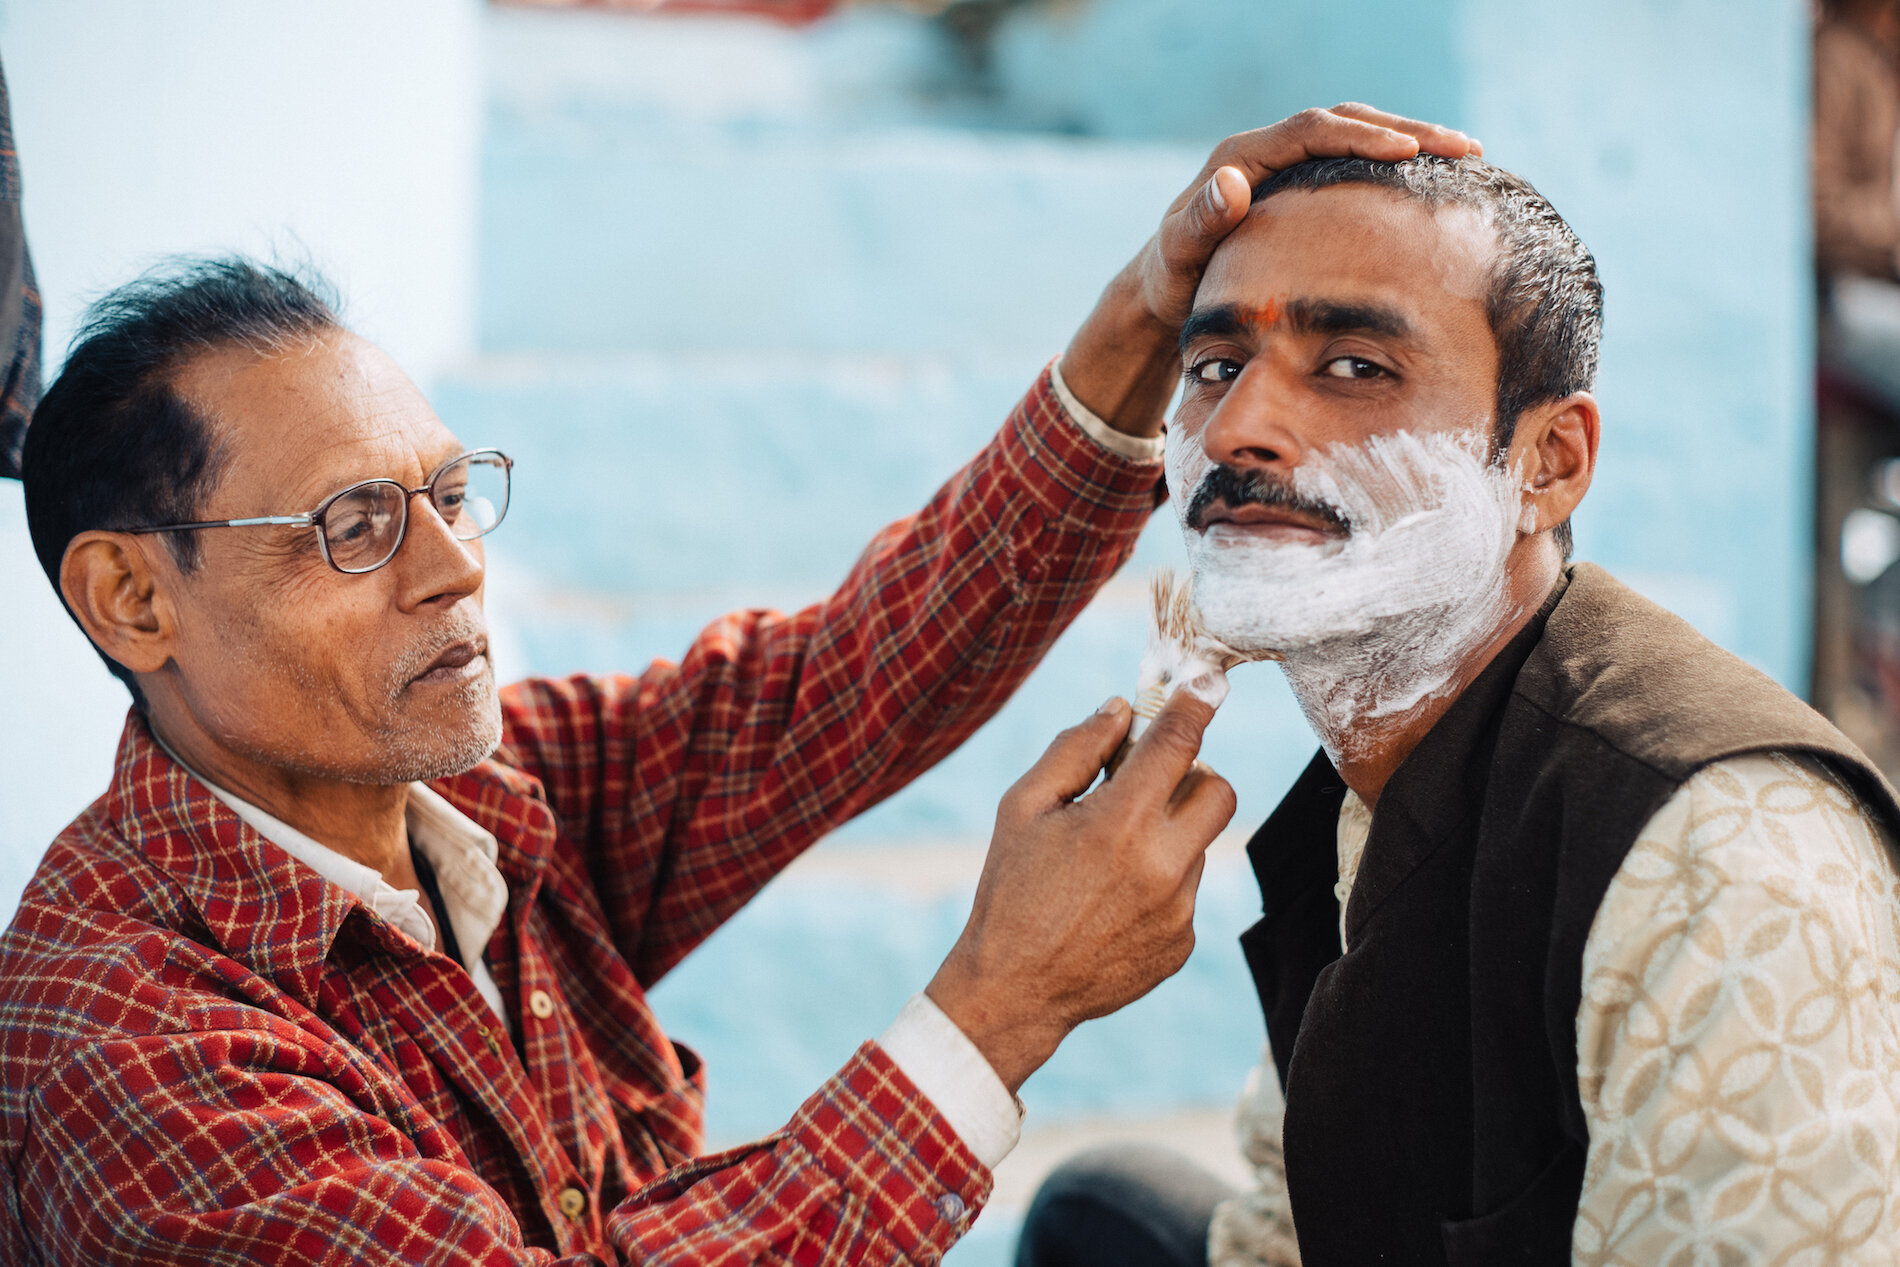  A barber and his client 